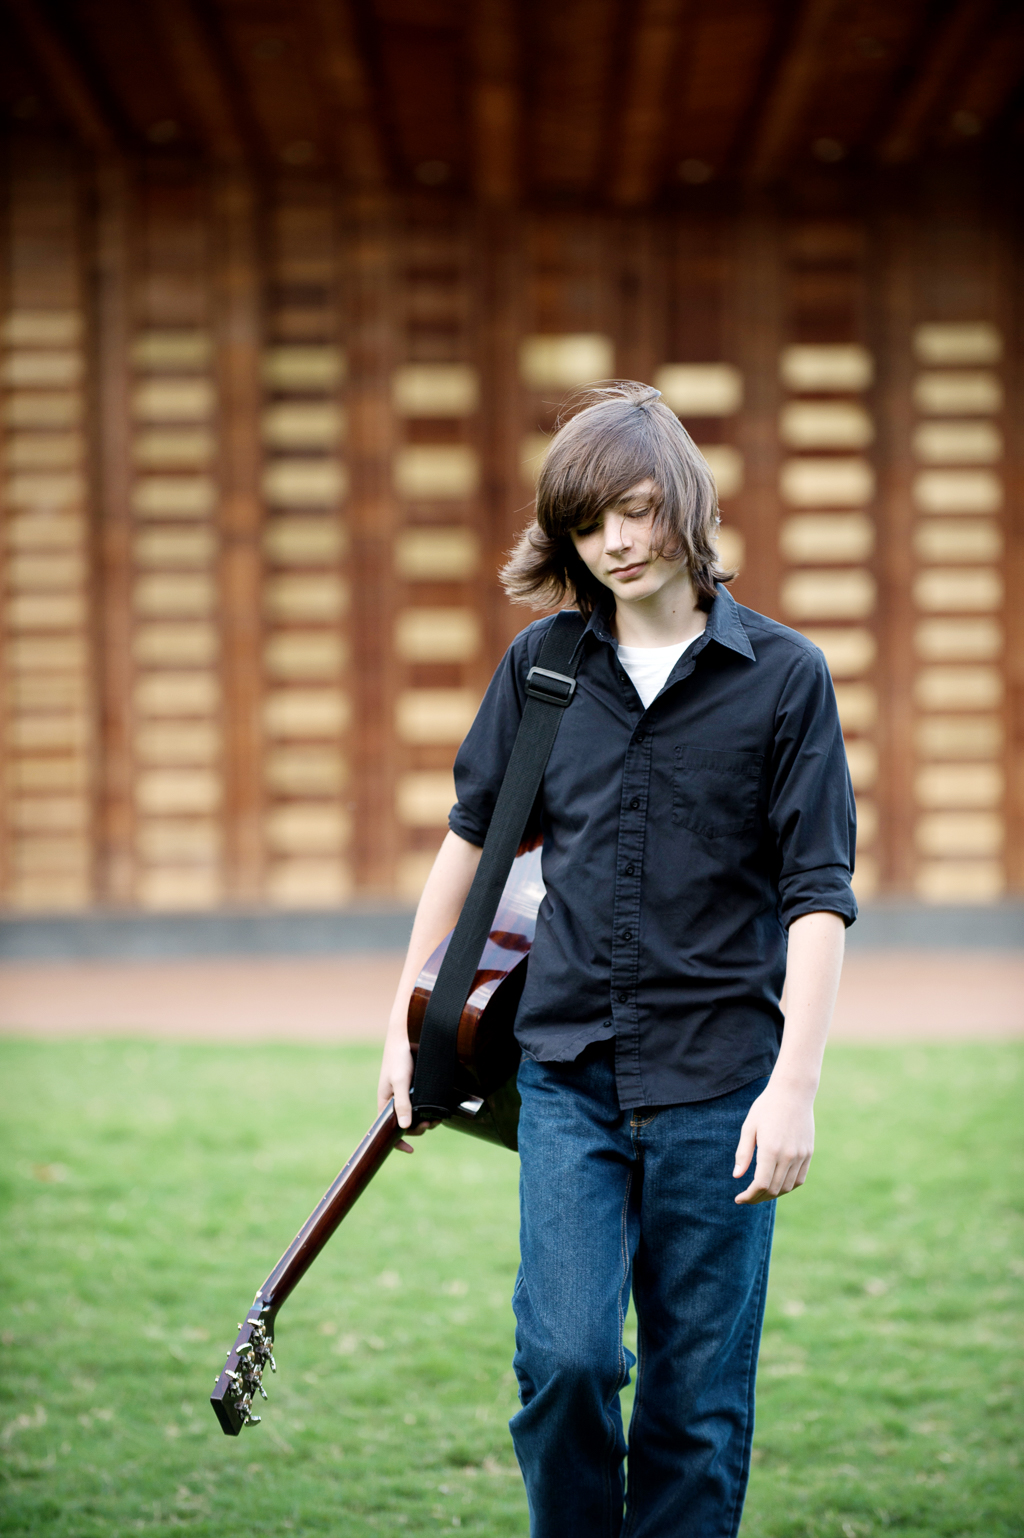 liam purcell of cane mill road walks with his guitar around his shoulder